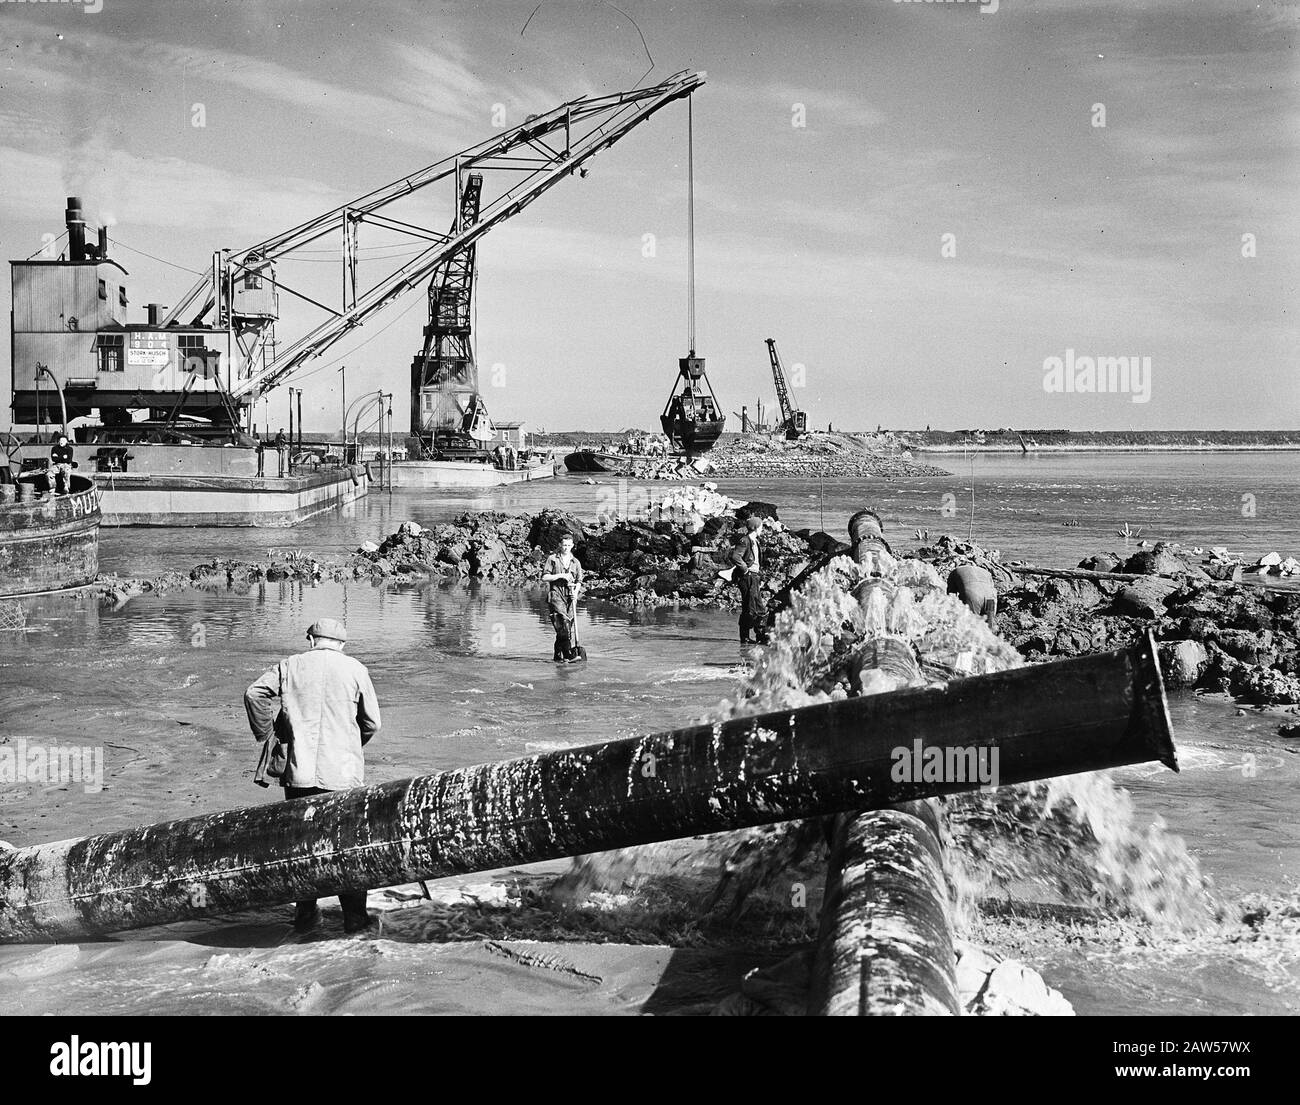 Construction Pictures Zealand Date: May 25, 1953 Location: Zeeland ...